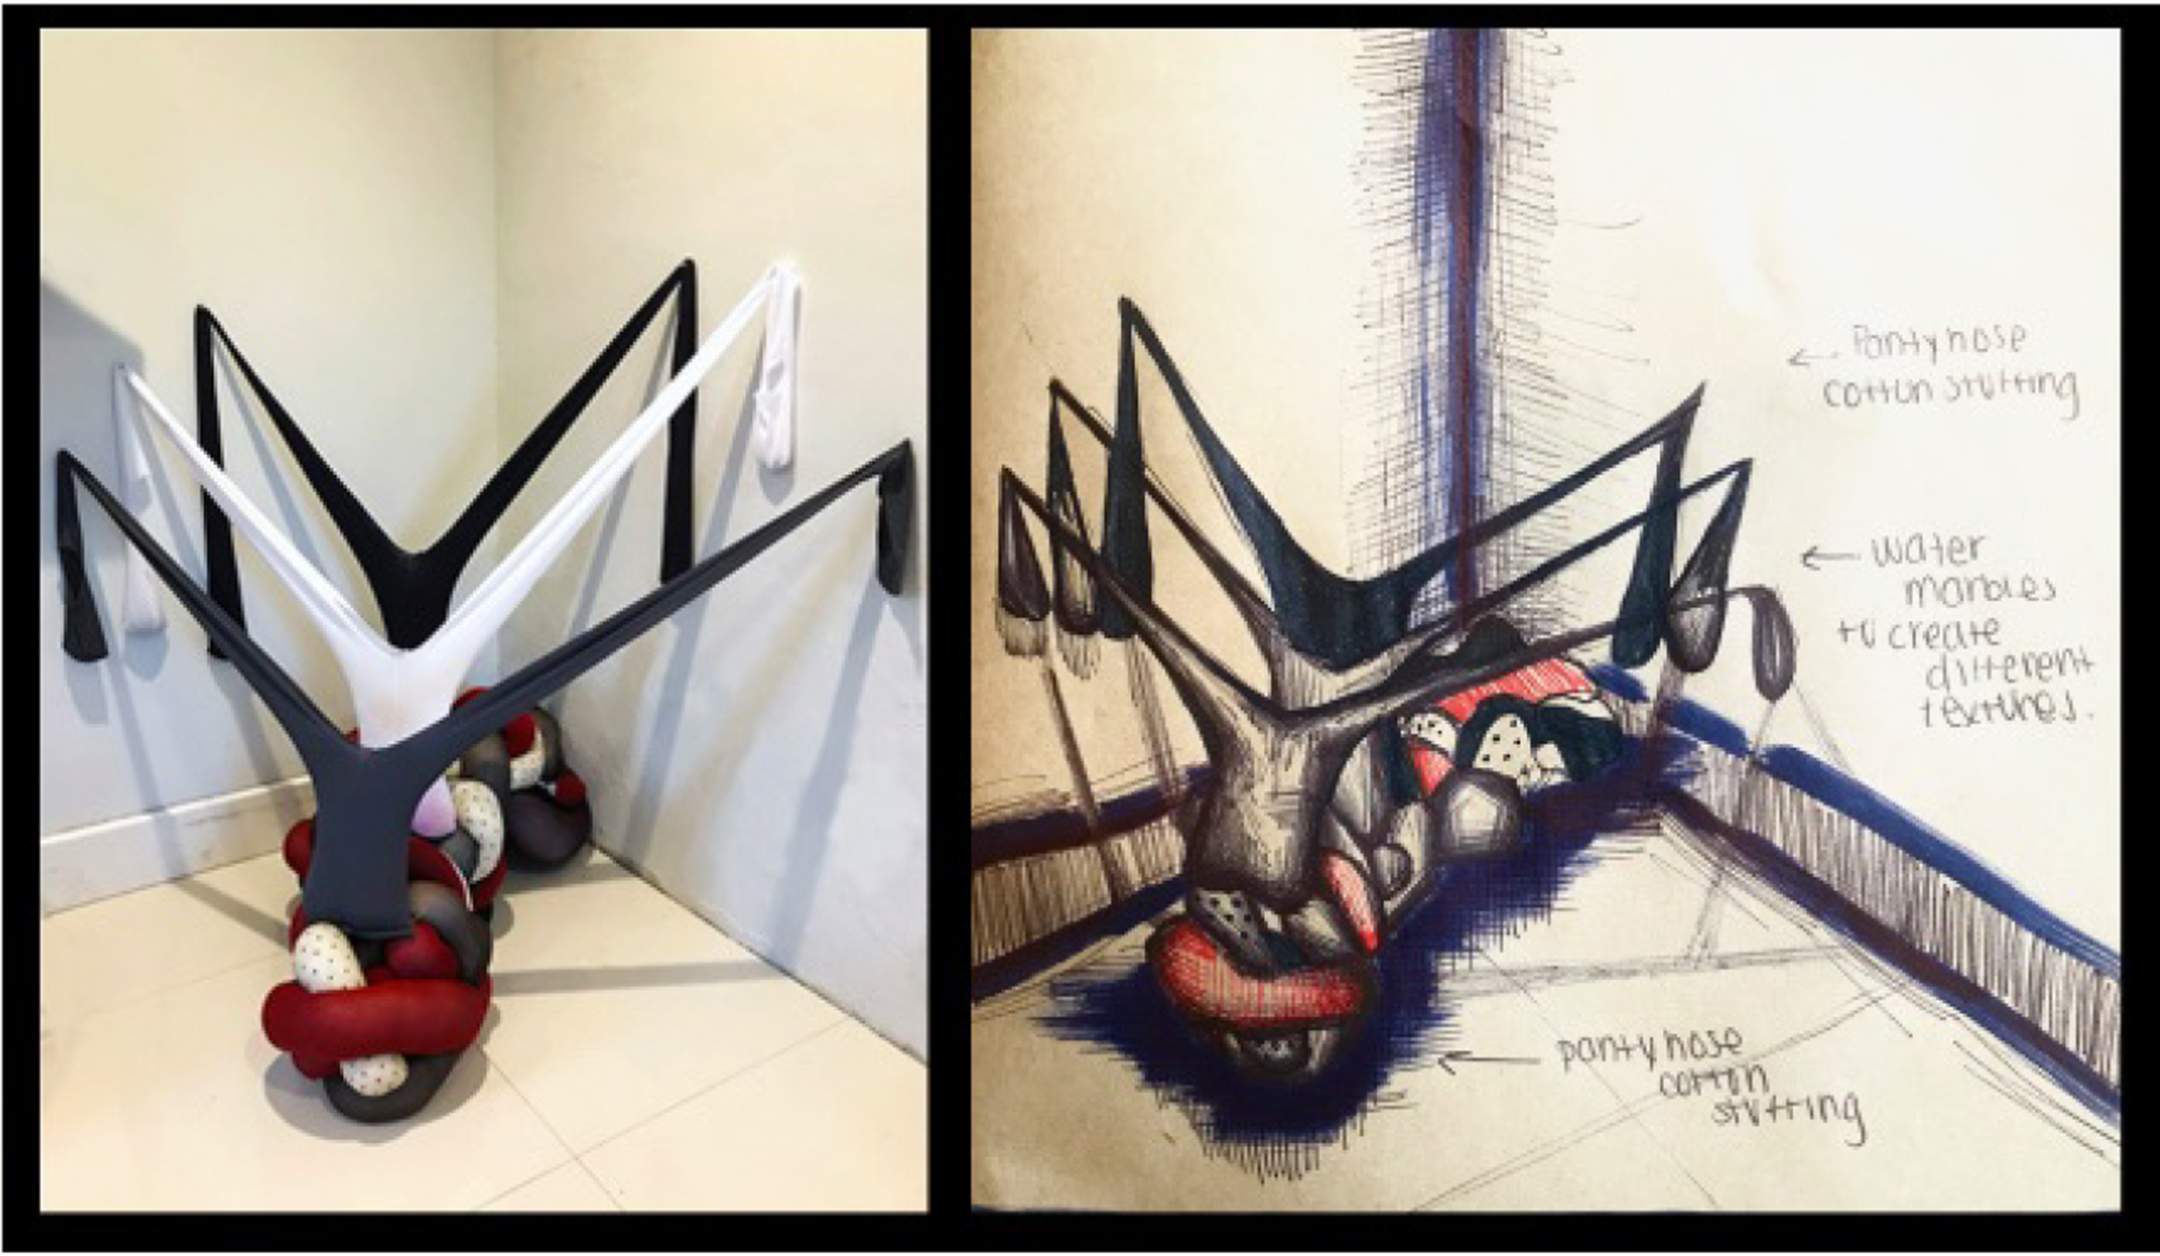 A mixed-media sculpture sitting in the corner and attached to the two walls, on the left, and a sketch of the work on the right